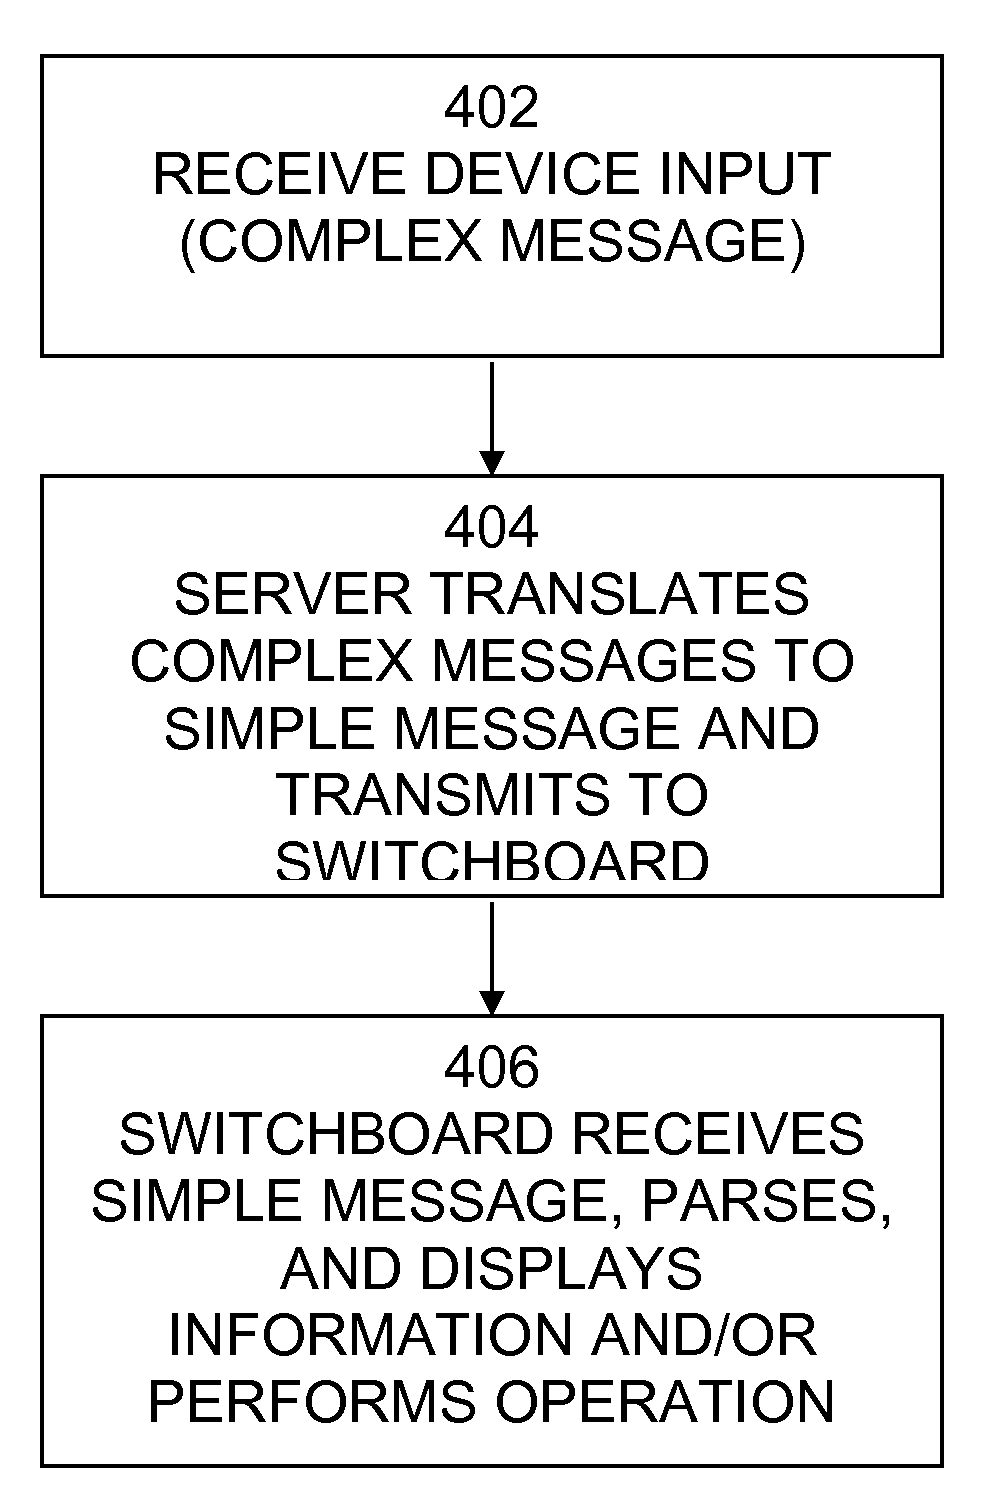 Software-based operator switchboard